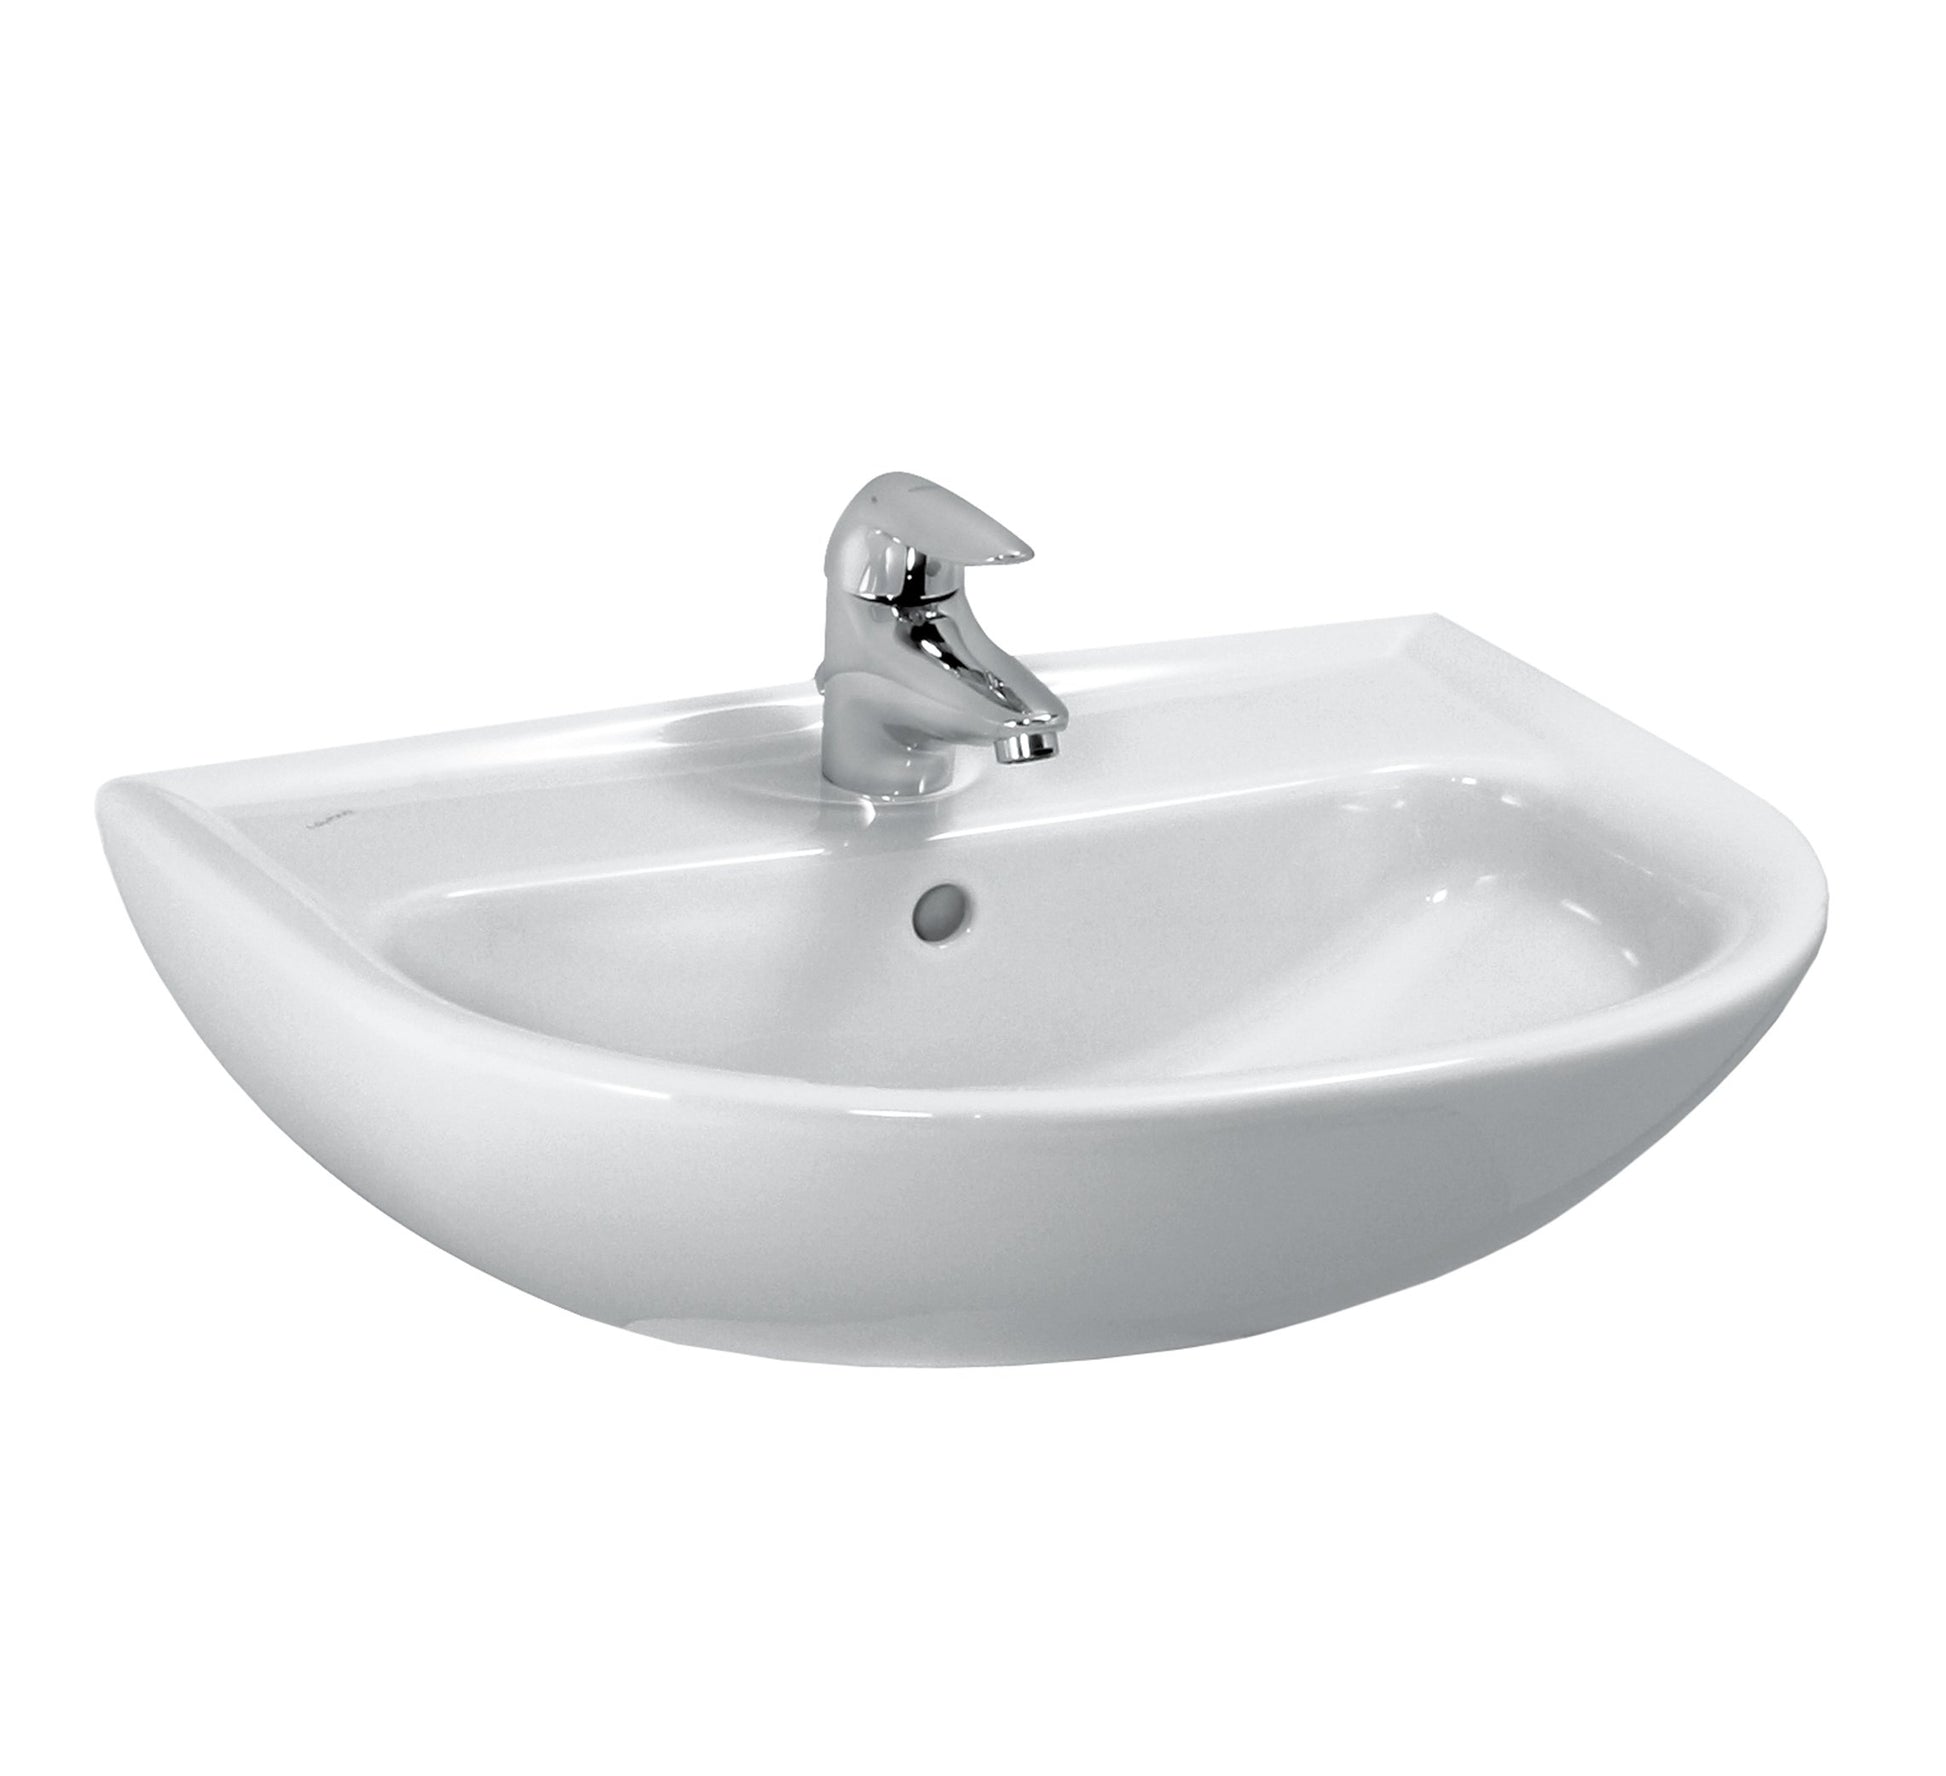 LAUFEN PRO B WASHBASIN 650 X 500 MM WITH TAPHOLE, WITH OVERFLOW HOLE WHITE - 8.1095.3.000.104.1 + SCREWS - 8.9988.2.000.000.1 - Tadmur Trading